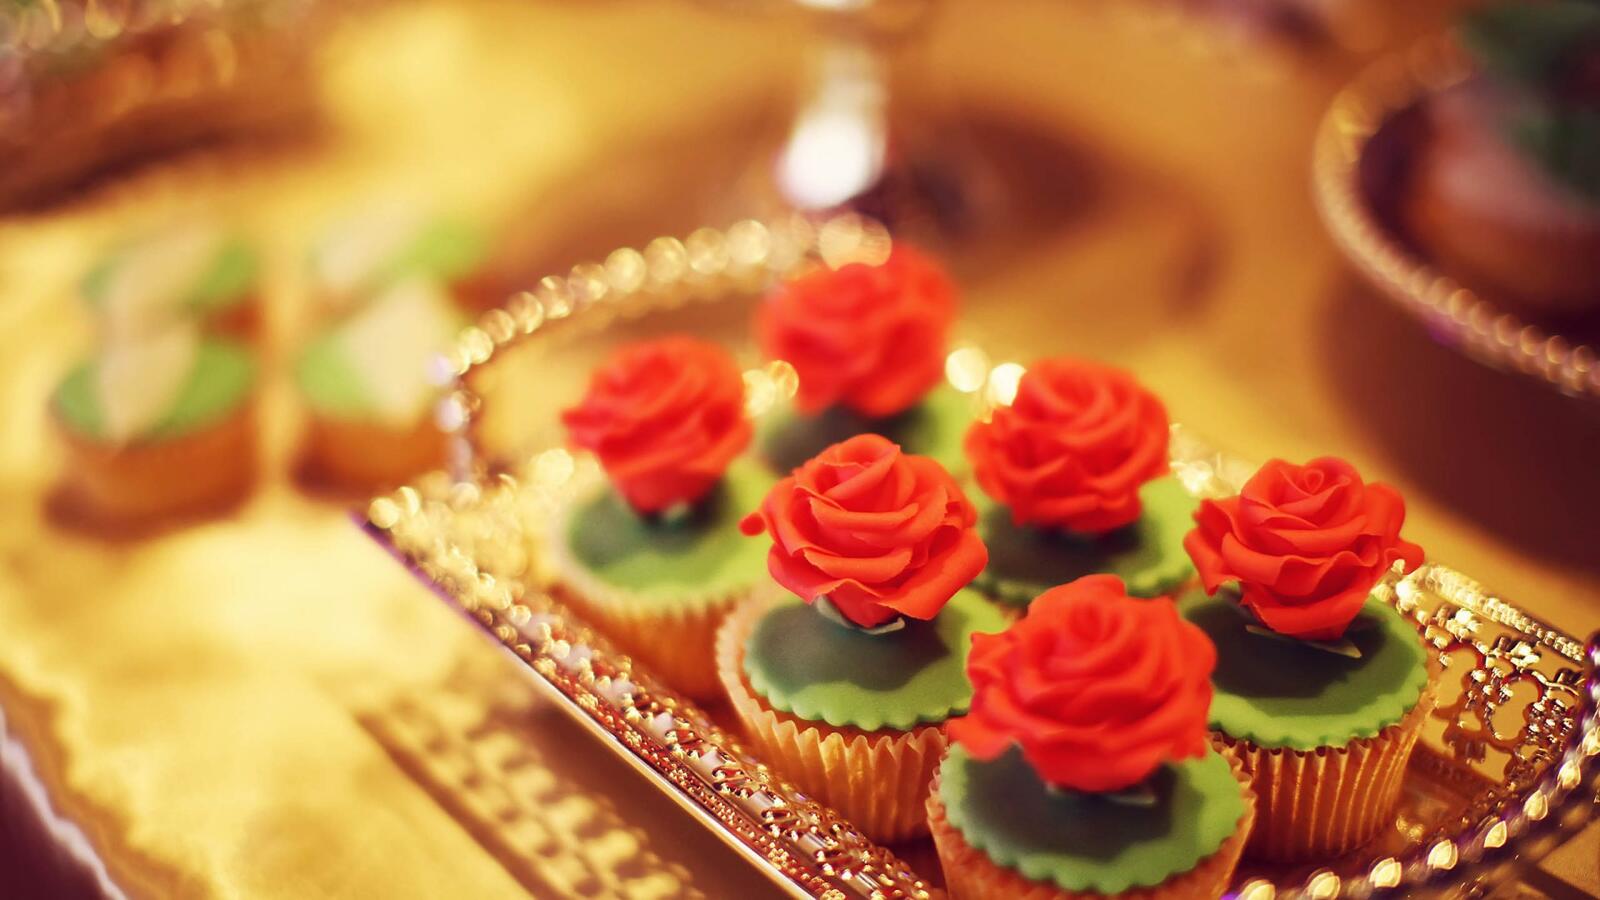 Wallpapers Rose cupcakes Wallpapers HD 1920x1080 food on the desktop